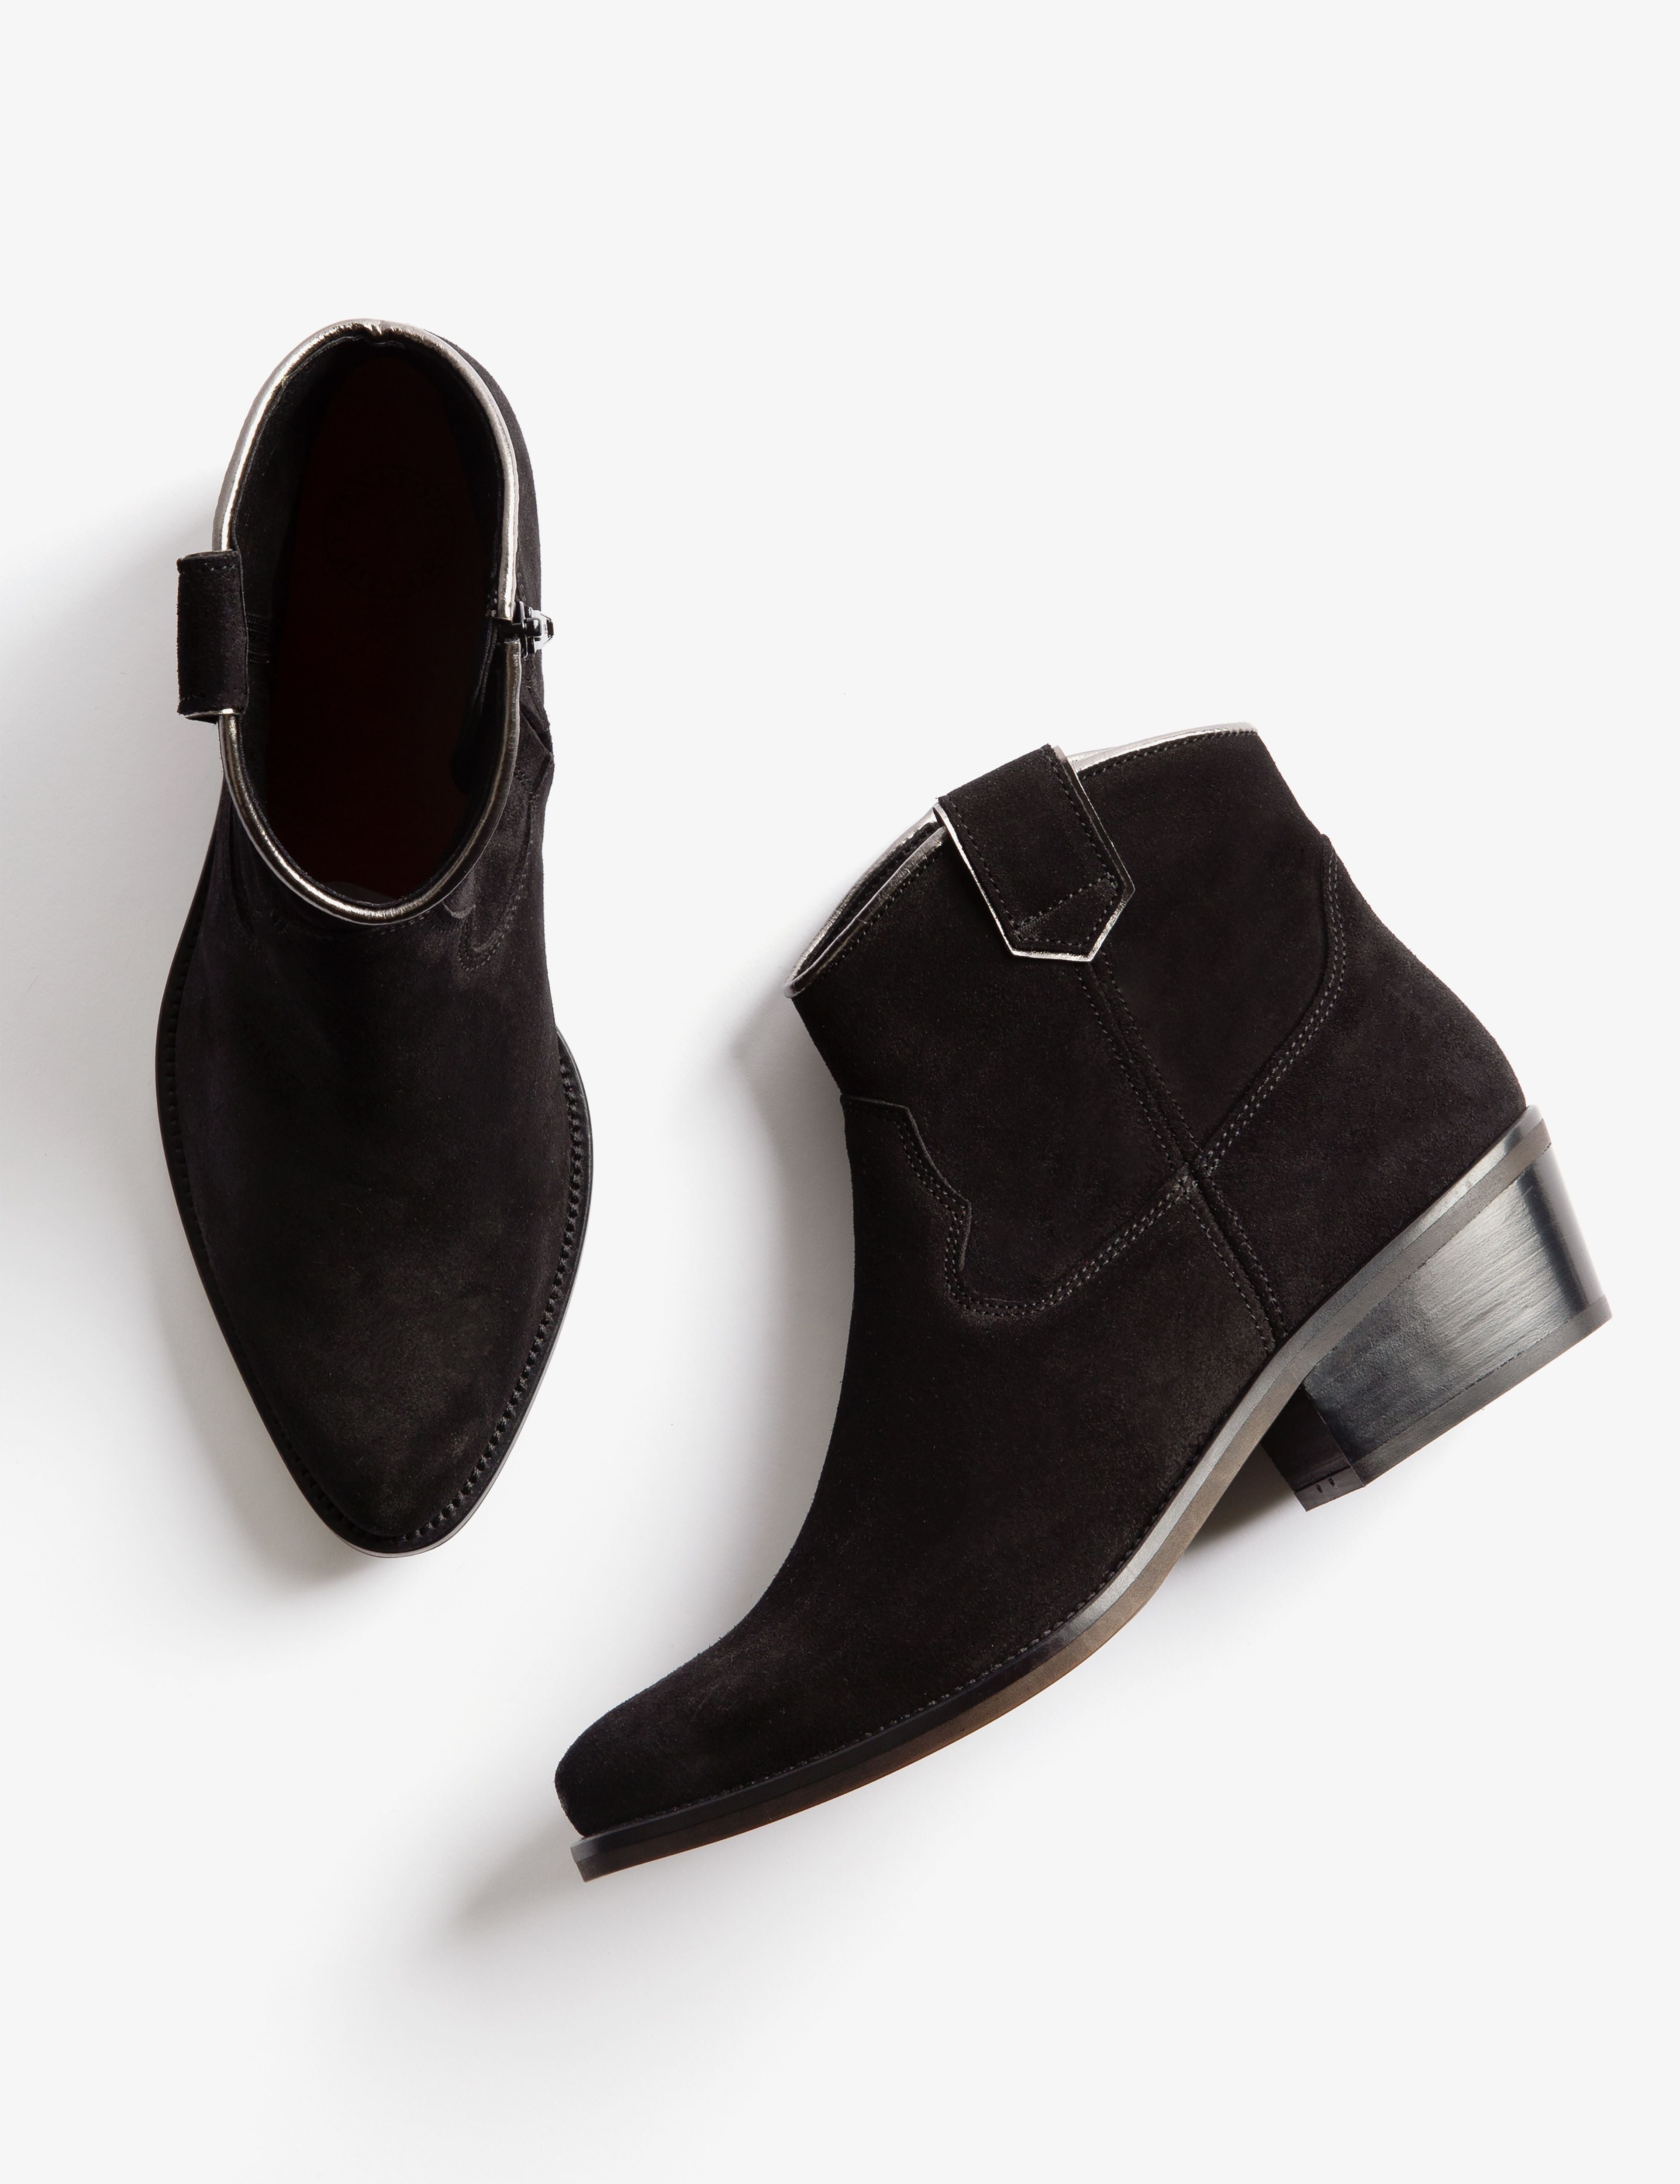 Cassidy Suede Boot - Black